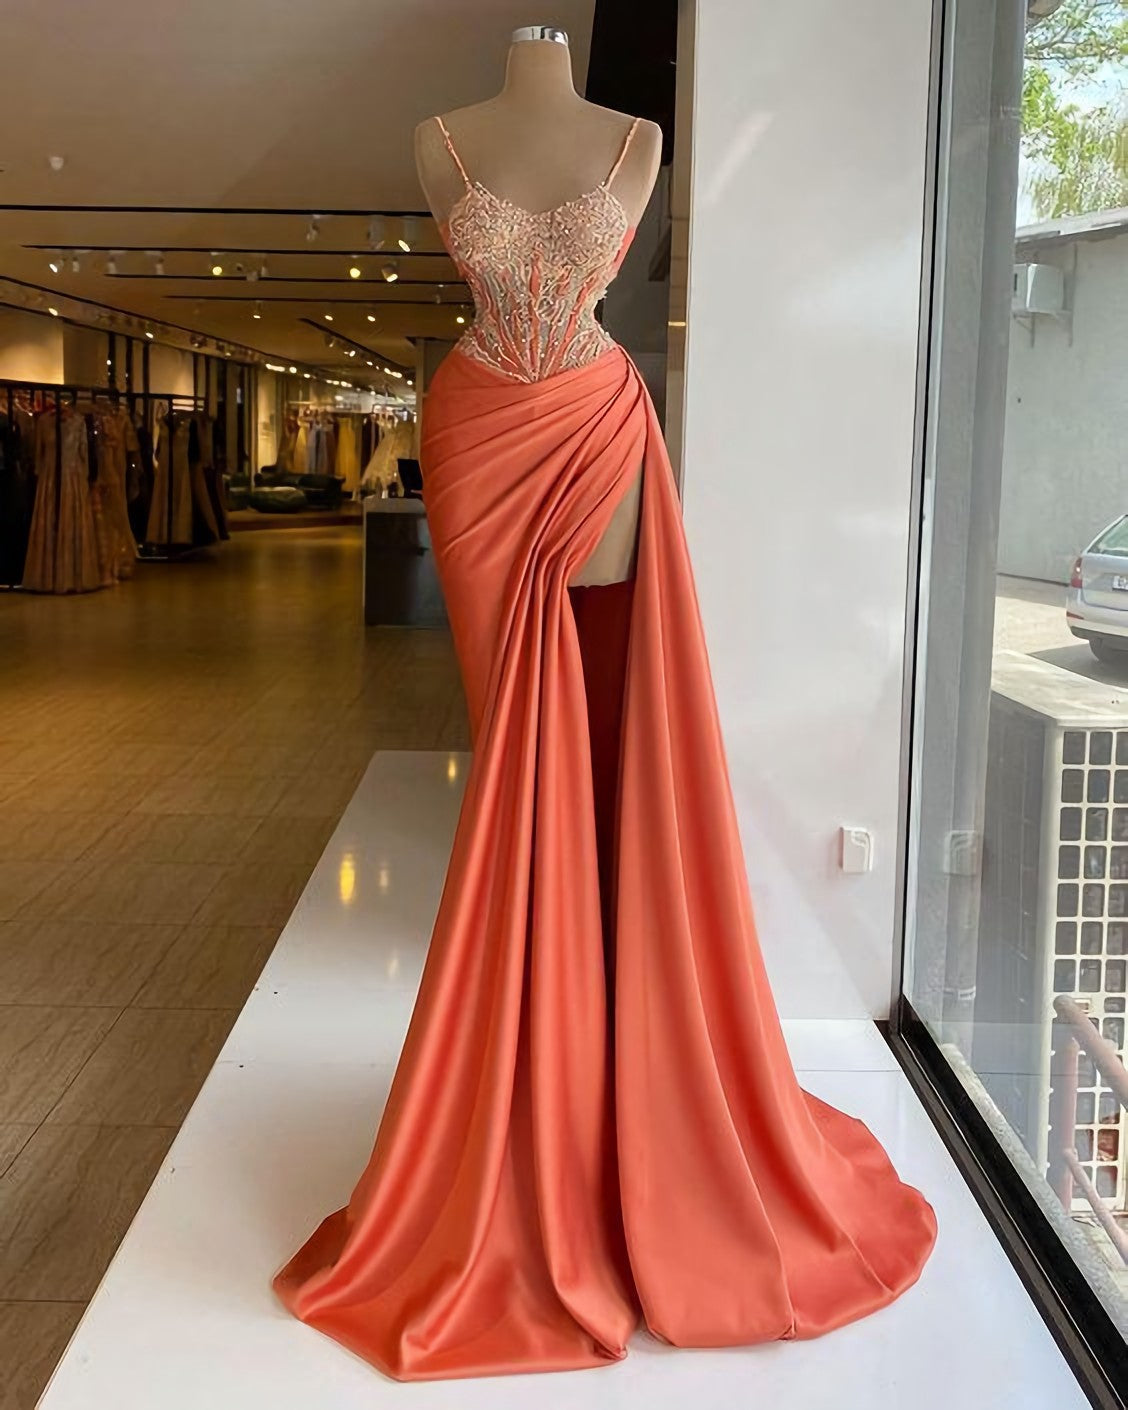 Prom Dress Gowns, Sheath Long Evening Dresses, Prom Party Dresses